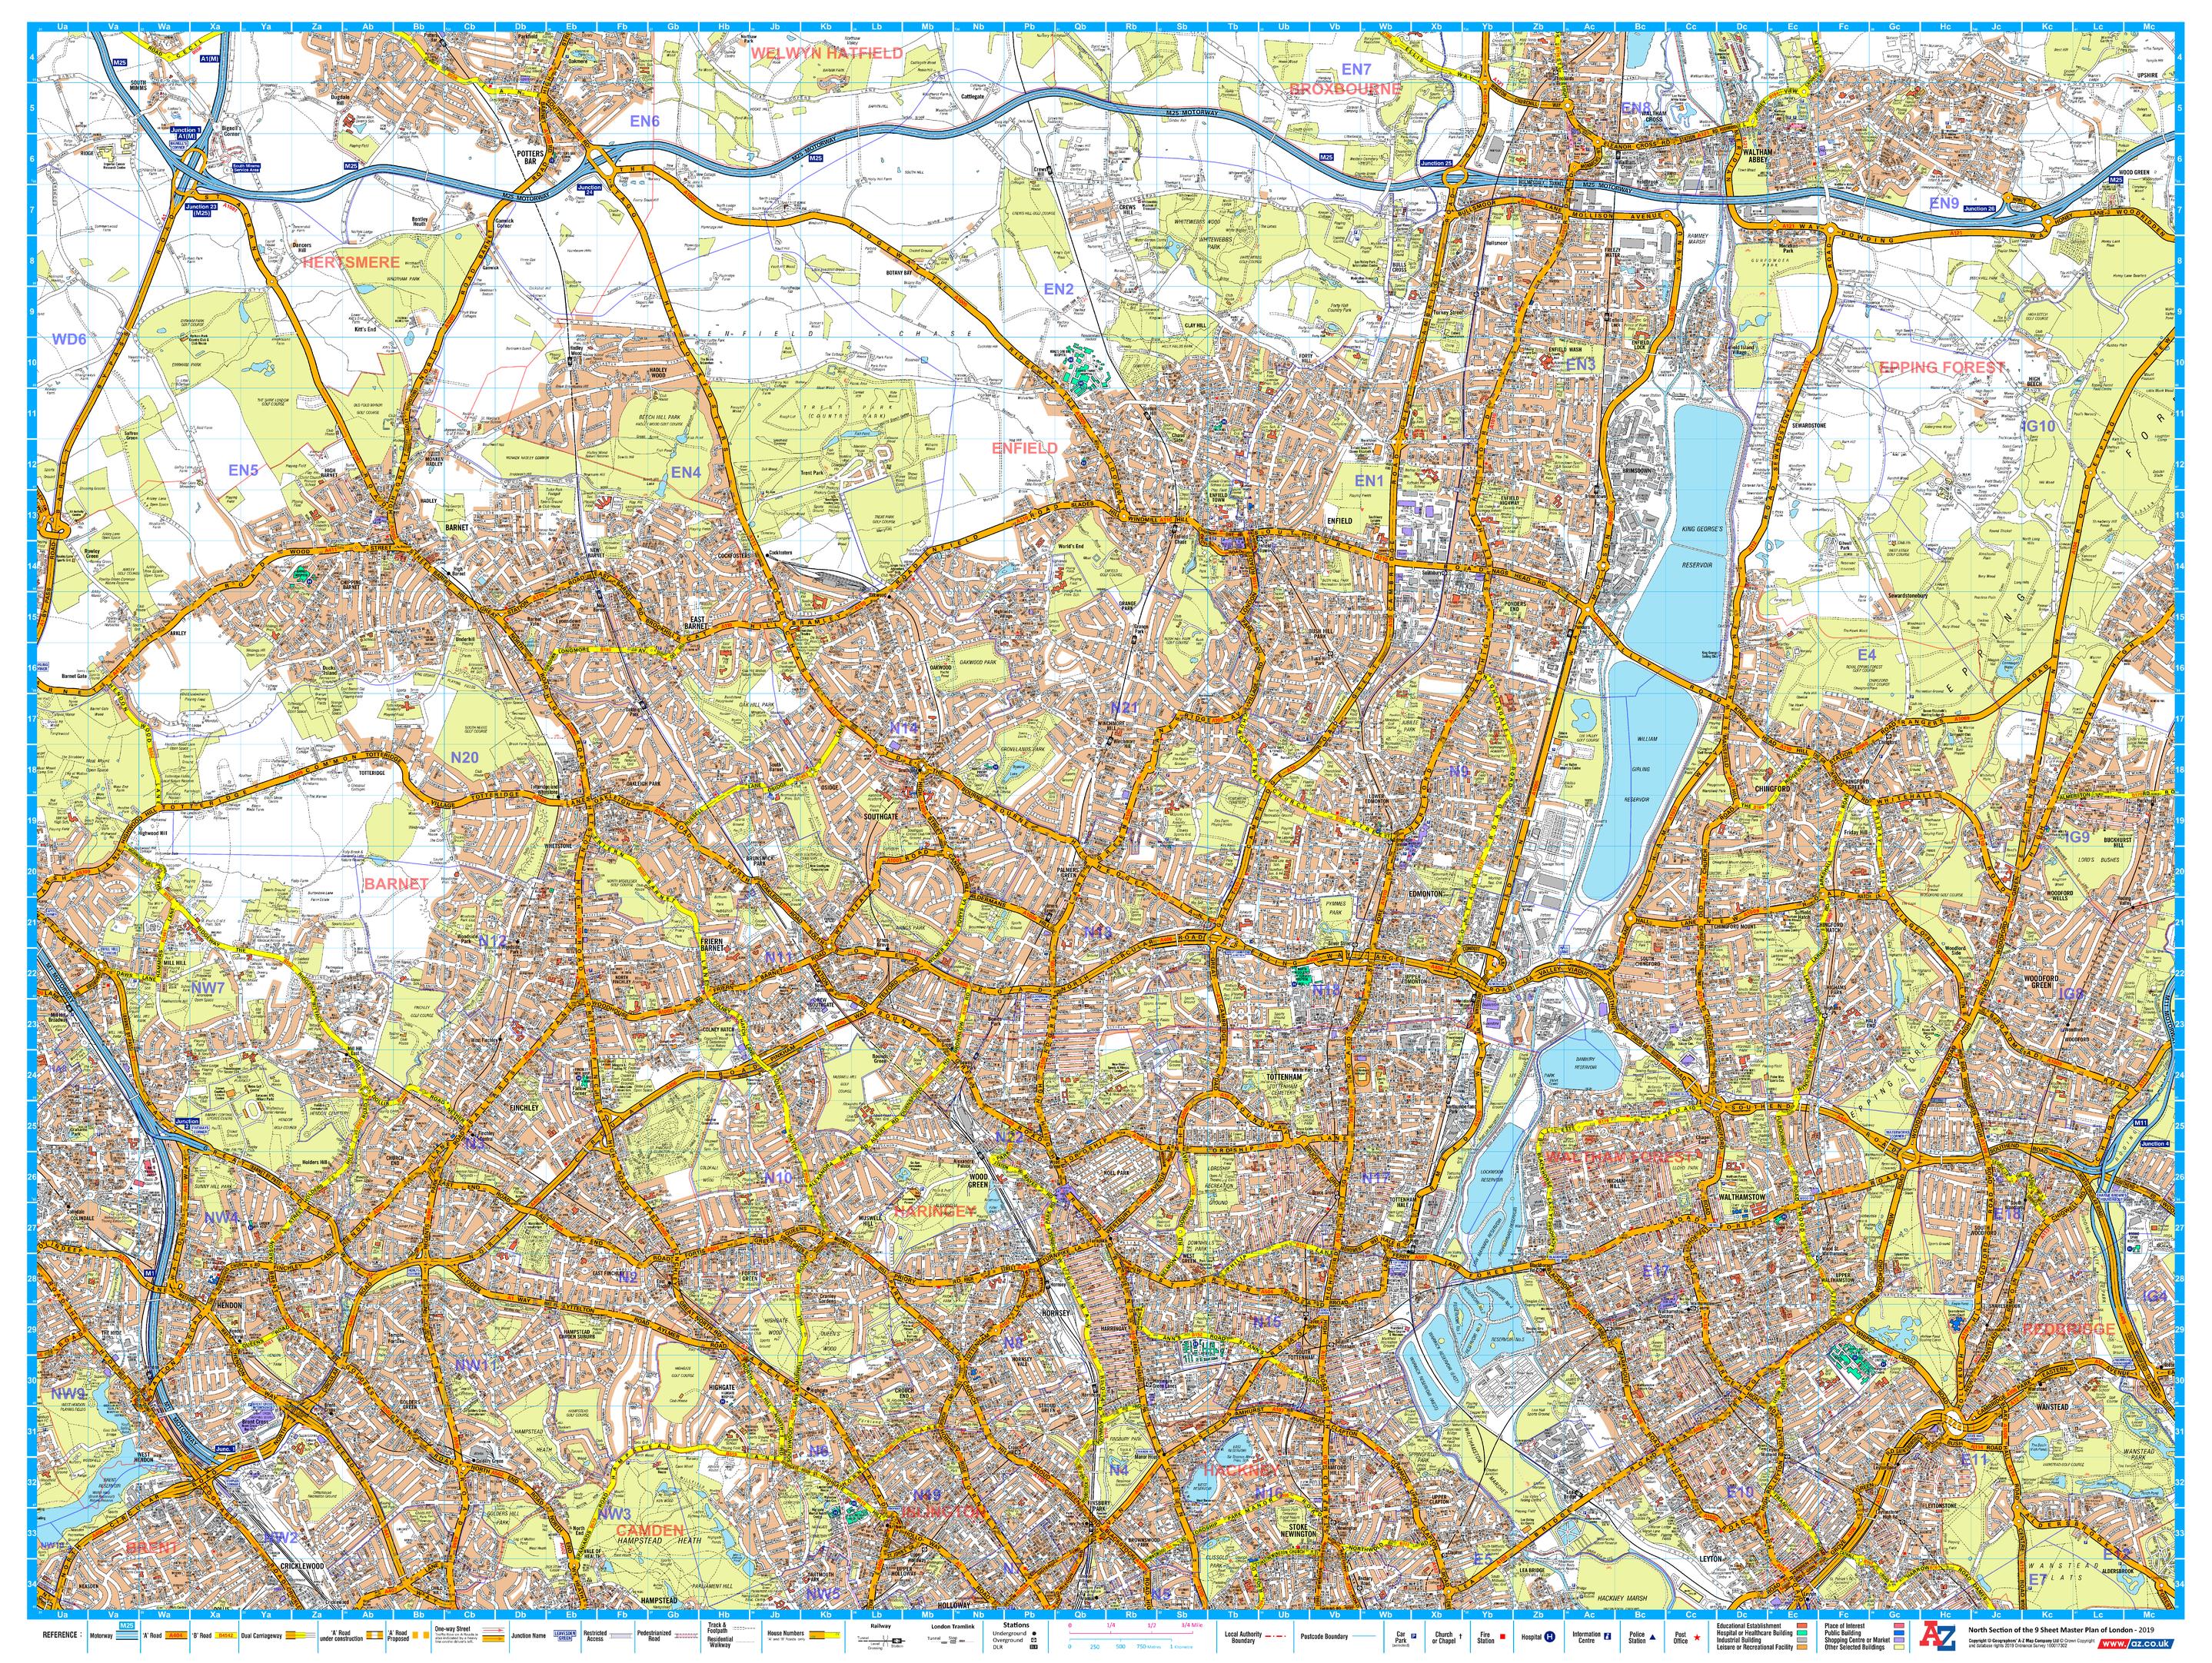 map of north london